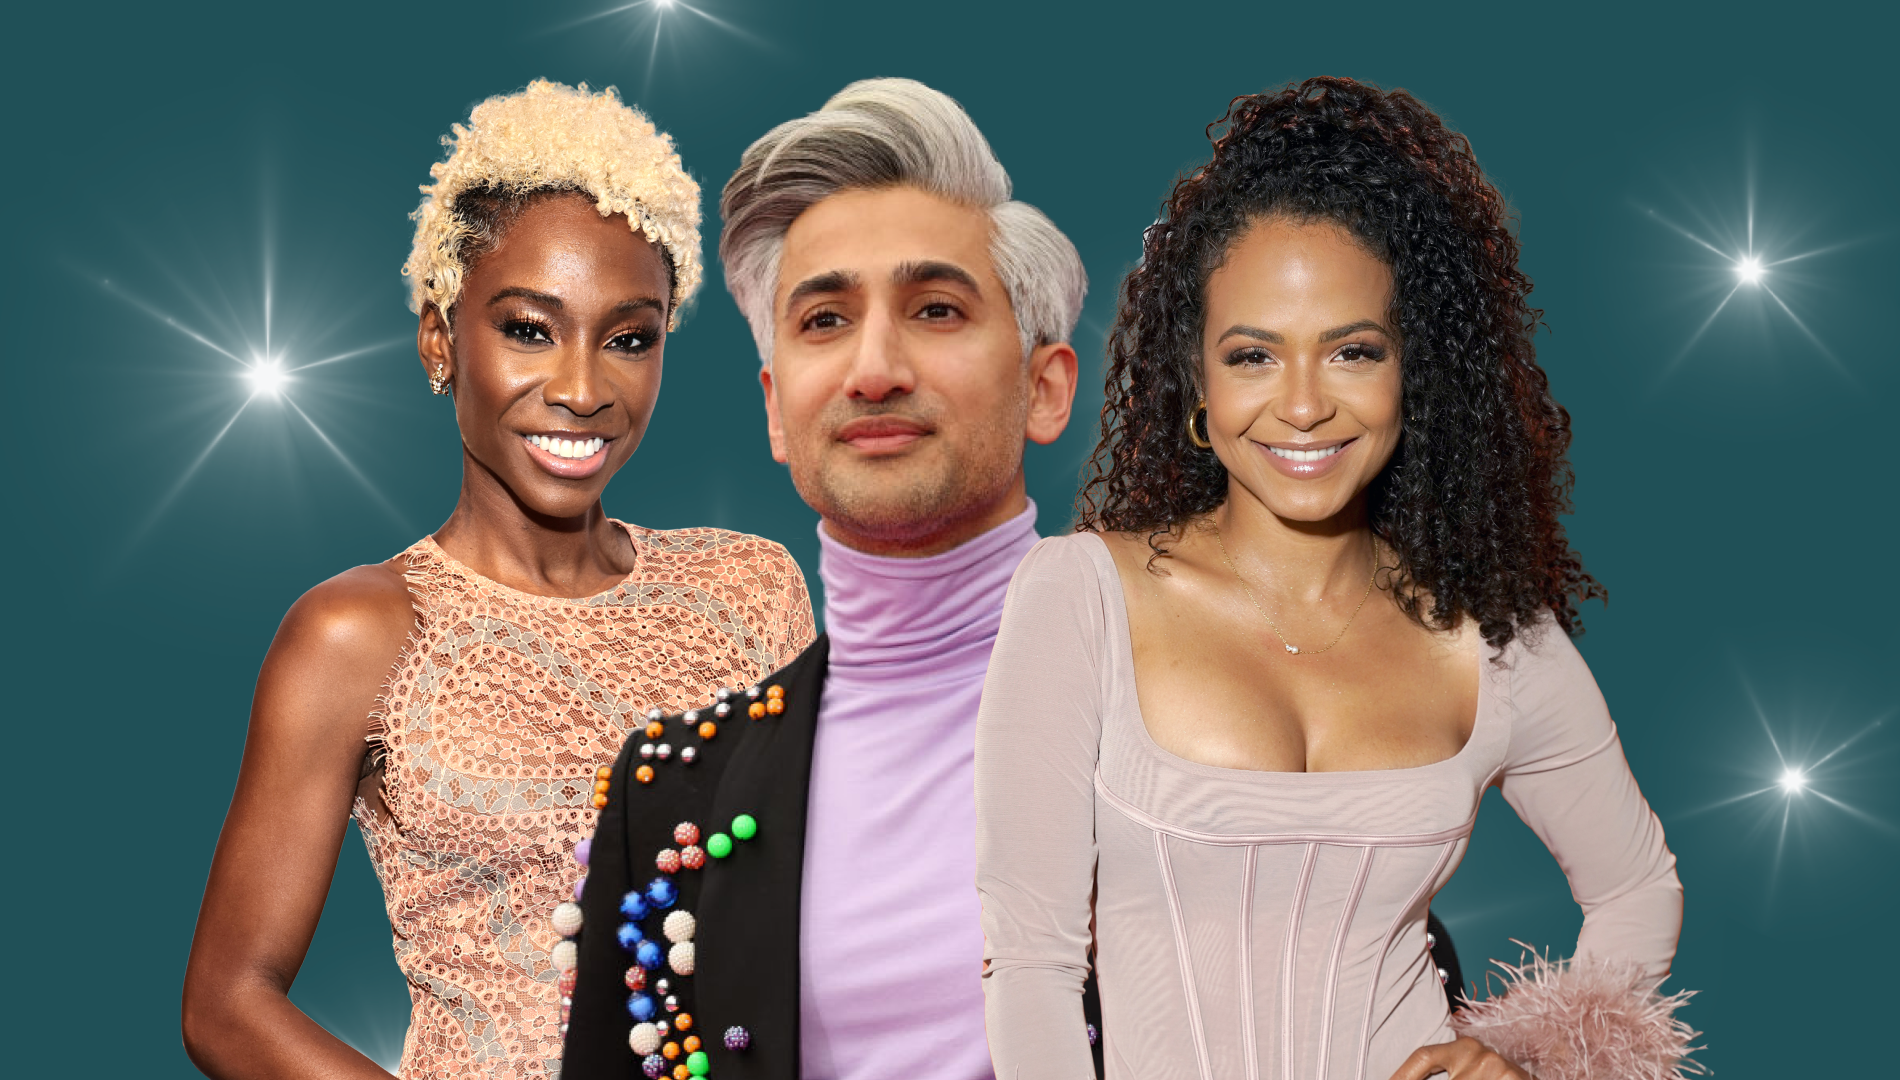 Pop Cultured with theSkimm promo image July 26, 2022 featuring Angelica Ross, Tan France, and Christina Milian.